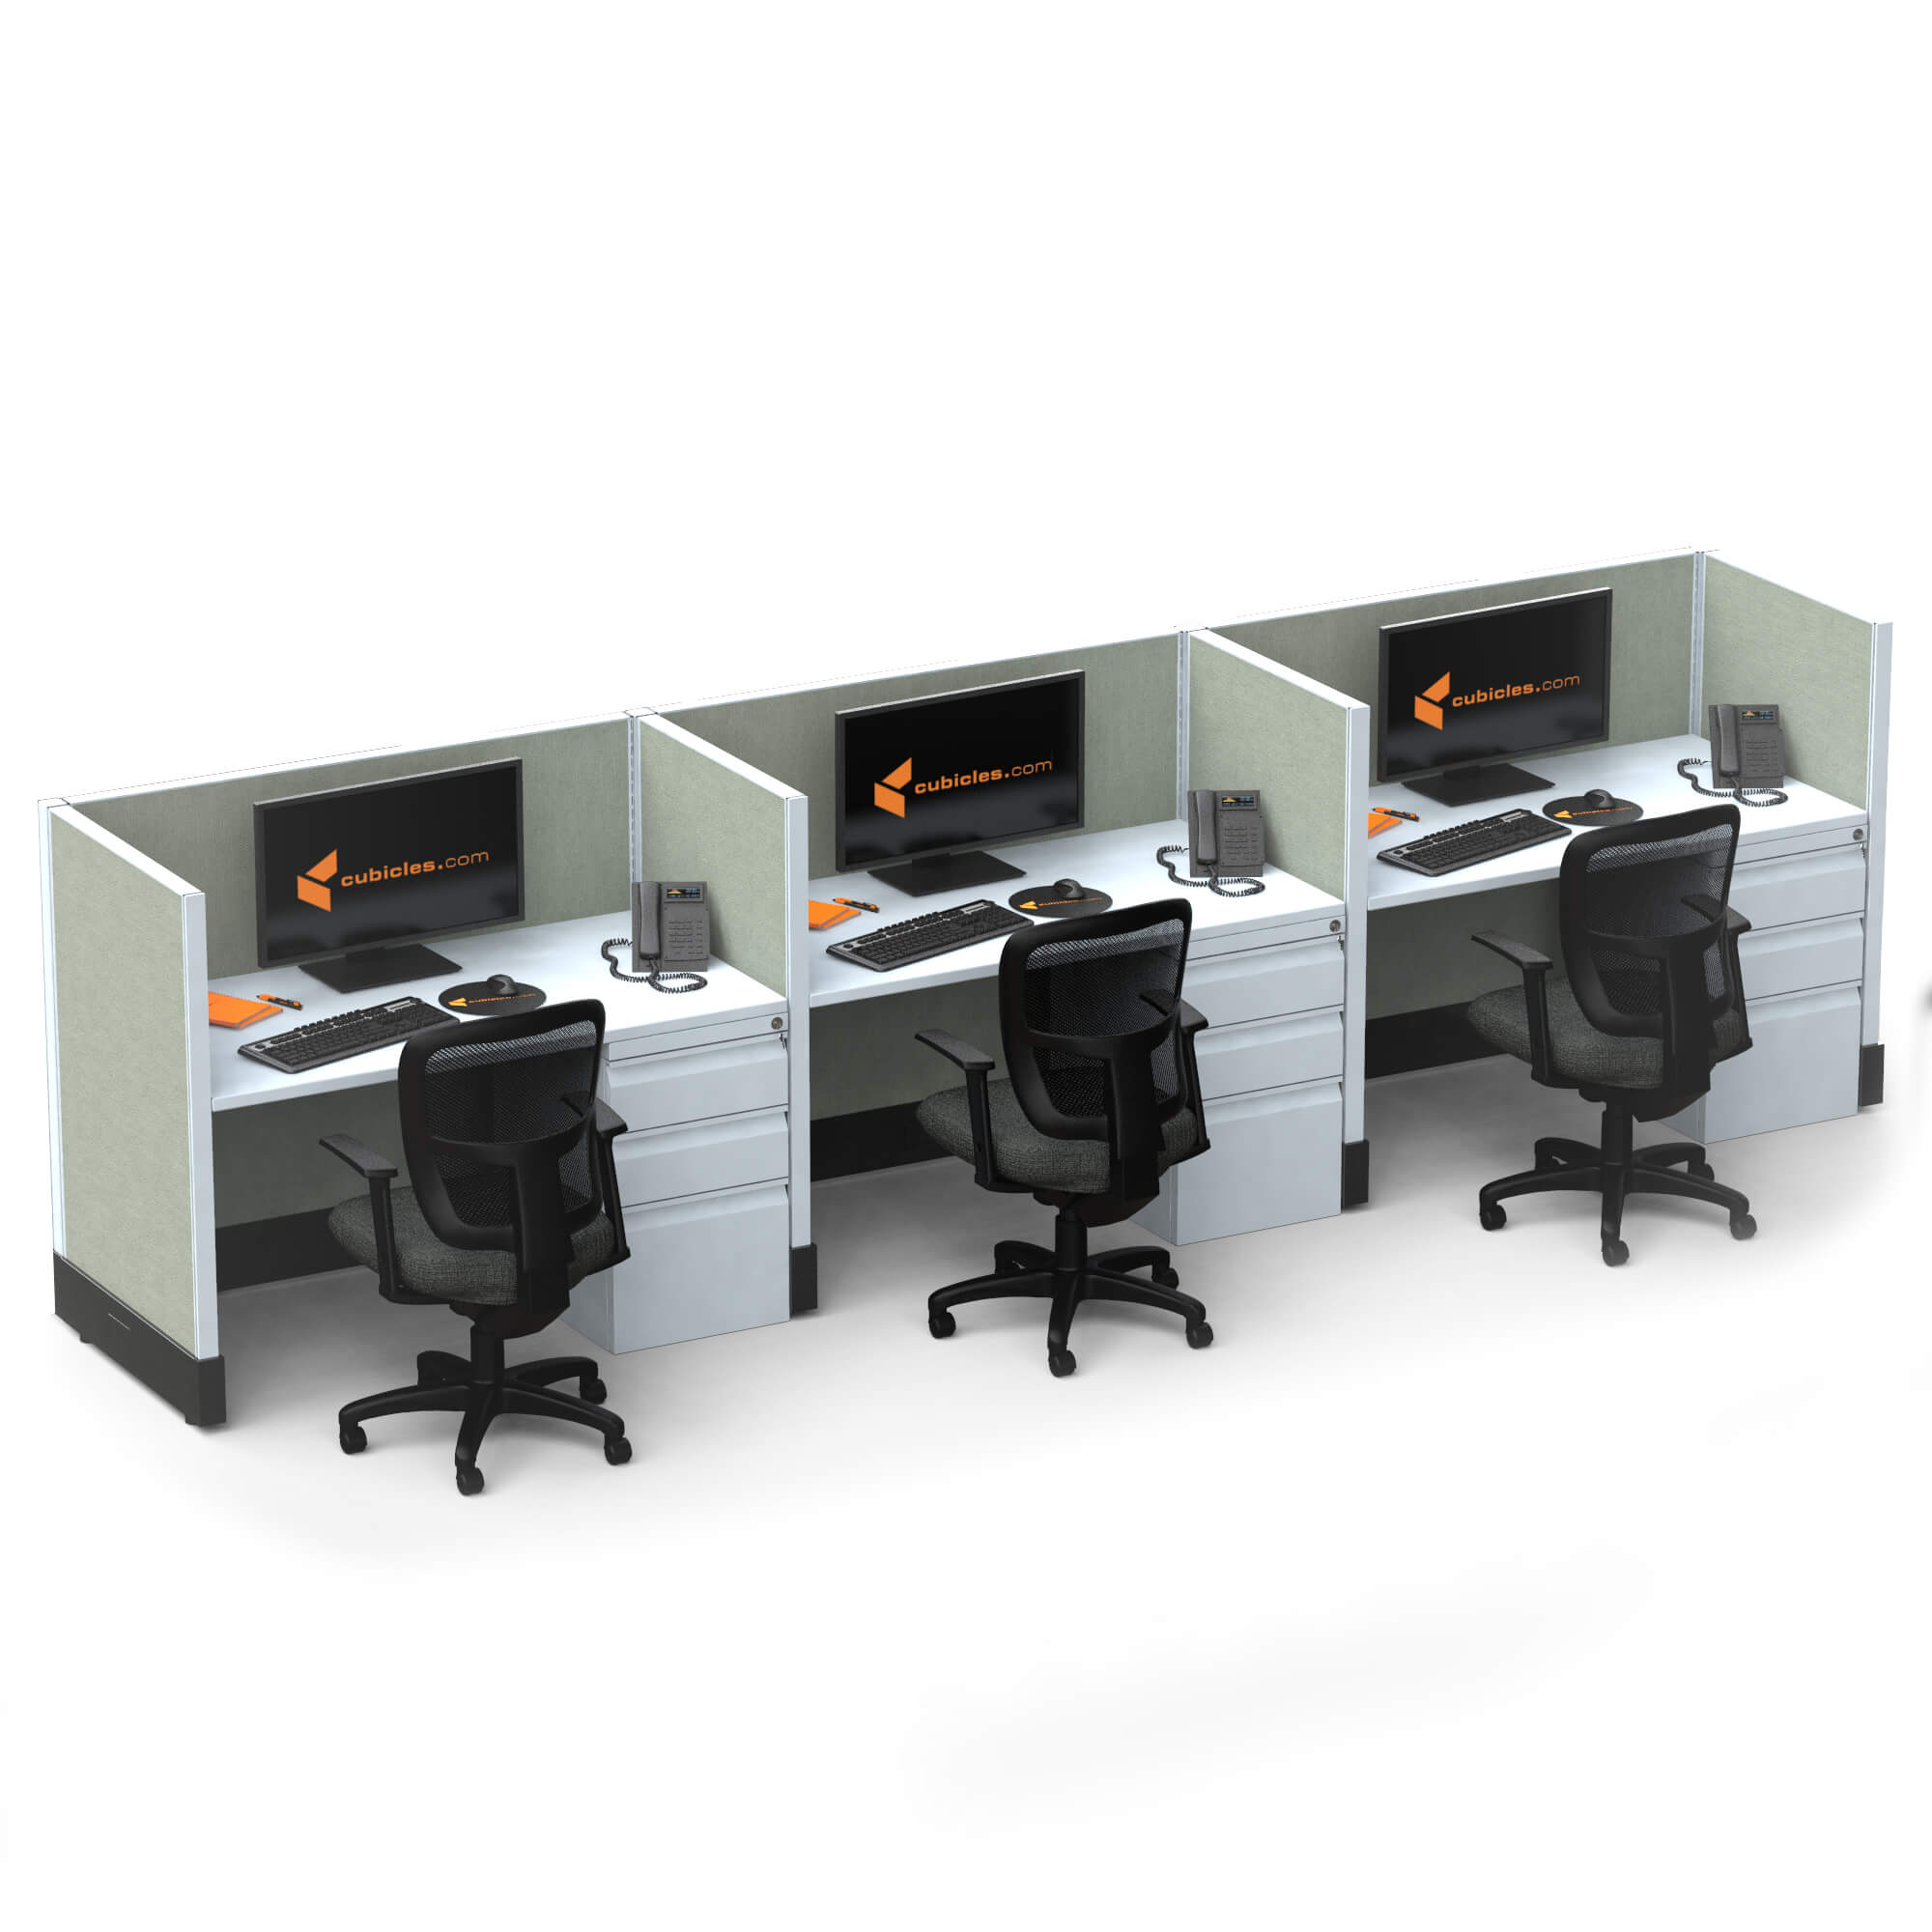 hot-desking-small-office-cubicles-3i-pack.jpg